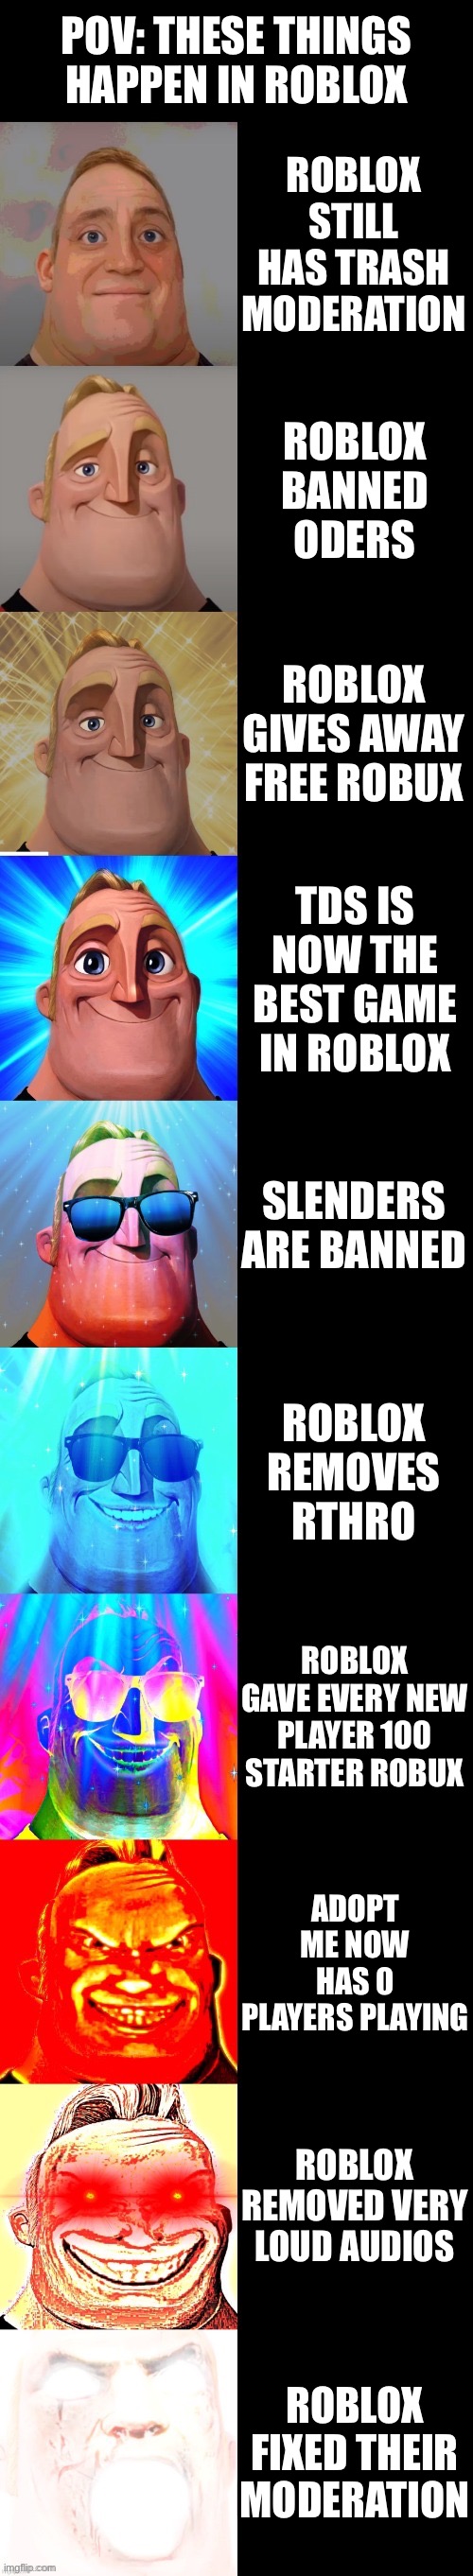 amogus | POV: THESE THINGS HAPPEN IN ROBLOX; ROBLOX STILL HAS TRASH MODERATION; ROBLOX BANNED ODERS; ROBLOX GIVES AWAY FREE ROBUX; TDS IS NOW THE BEST GAME IN ROBLOX; SLENDERS ARE BANNED; ROBLOX REMOVES RTHRO; ROBLOX GAVE EVERY NEW PLAYER 100 STARTER ROBUX; ADOPT ME NOW HAS 0 PLAYERS PLAYING; ROBLOX REMOVED VERY LOUD AUDIOS; ROBLOX FIXED THEIR MODERATION | image tagged in mr incredible becoming canny,roblox,funny,gaming | made w/ Imgflip meme maker